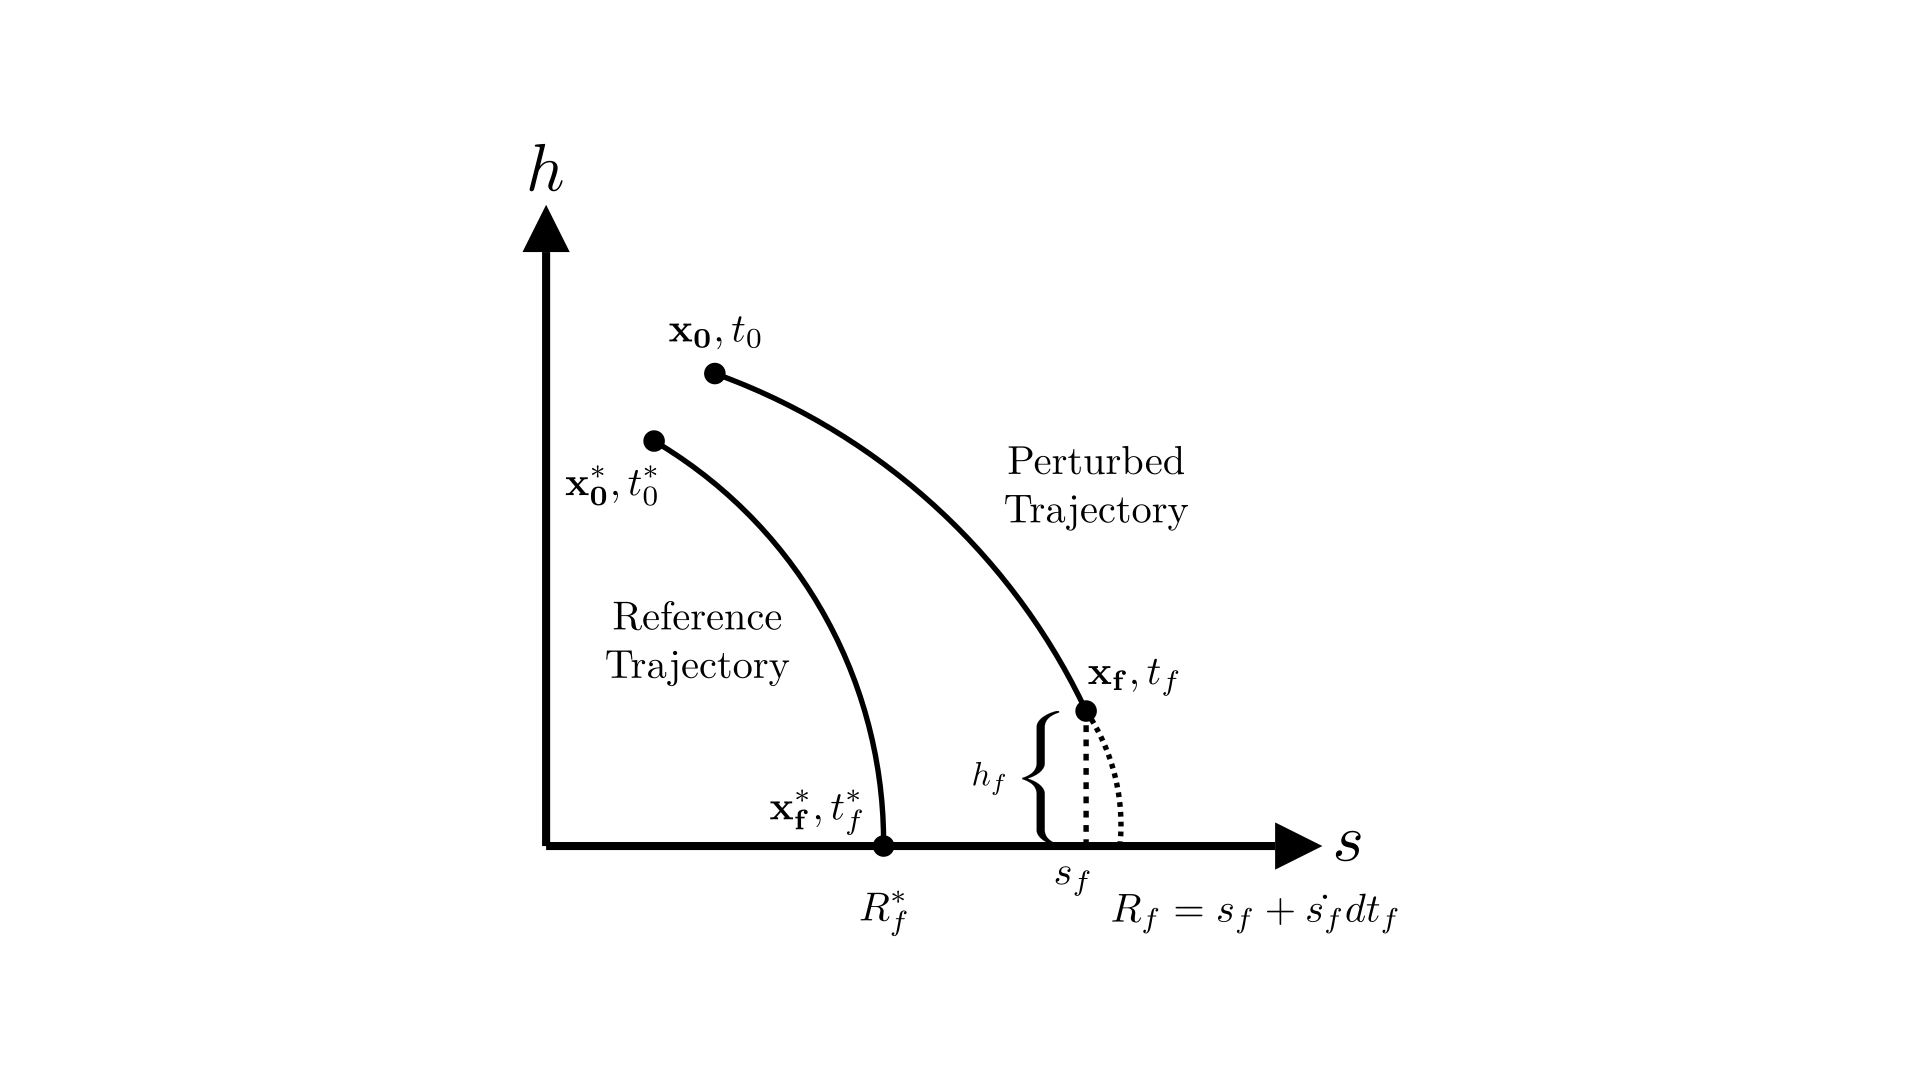 Reference Trajectory and Perturbed Trajectory